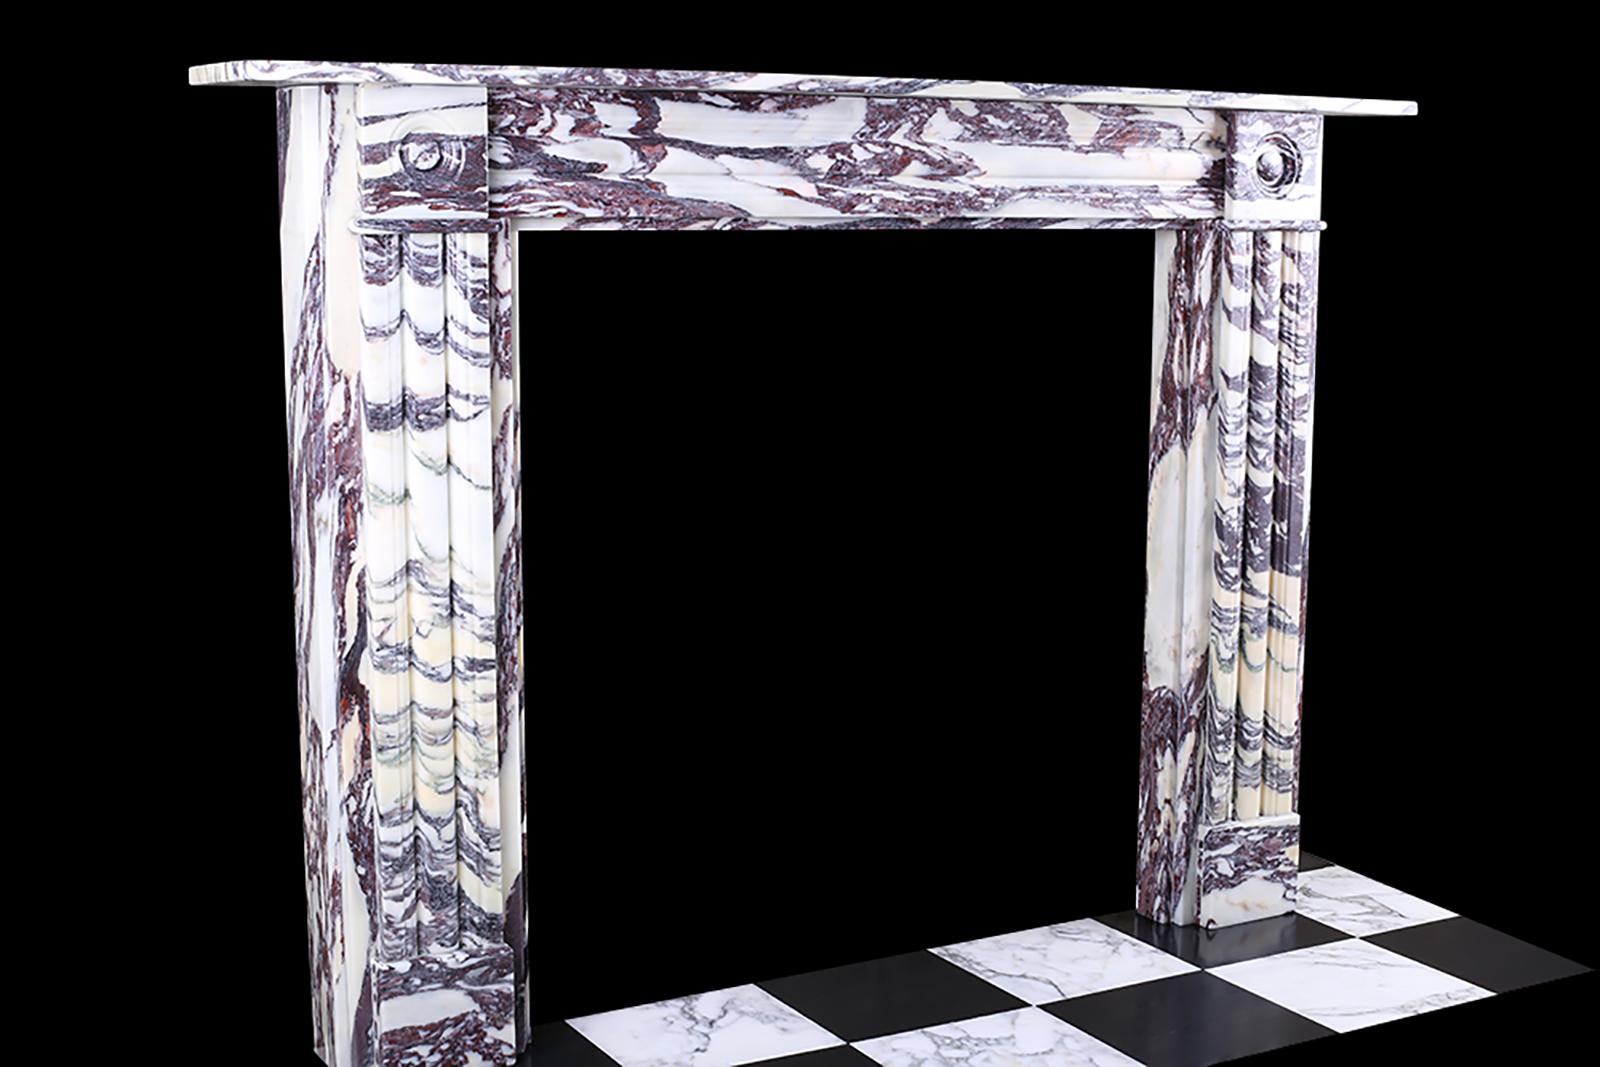 Hand-Carved Double-Slip Georgian Style Fireplace Surround Italian Violette Brescia Marble For Sale